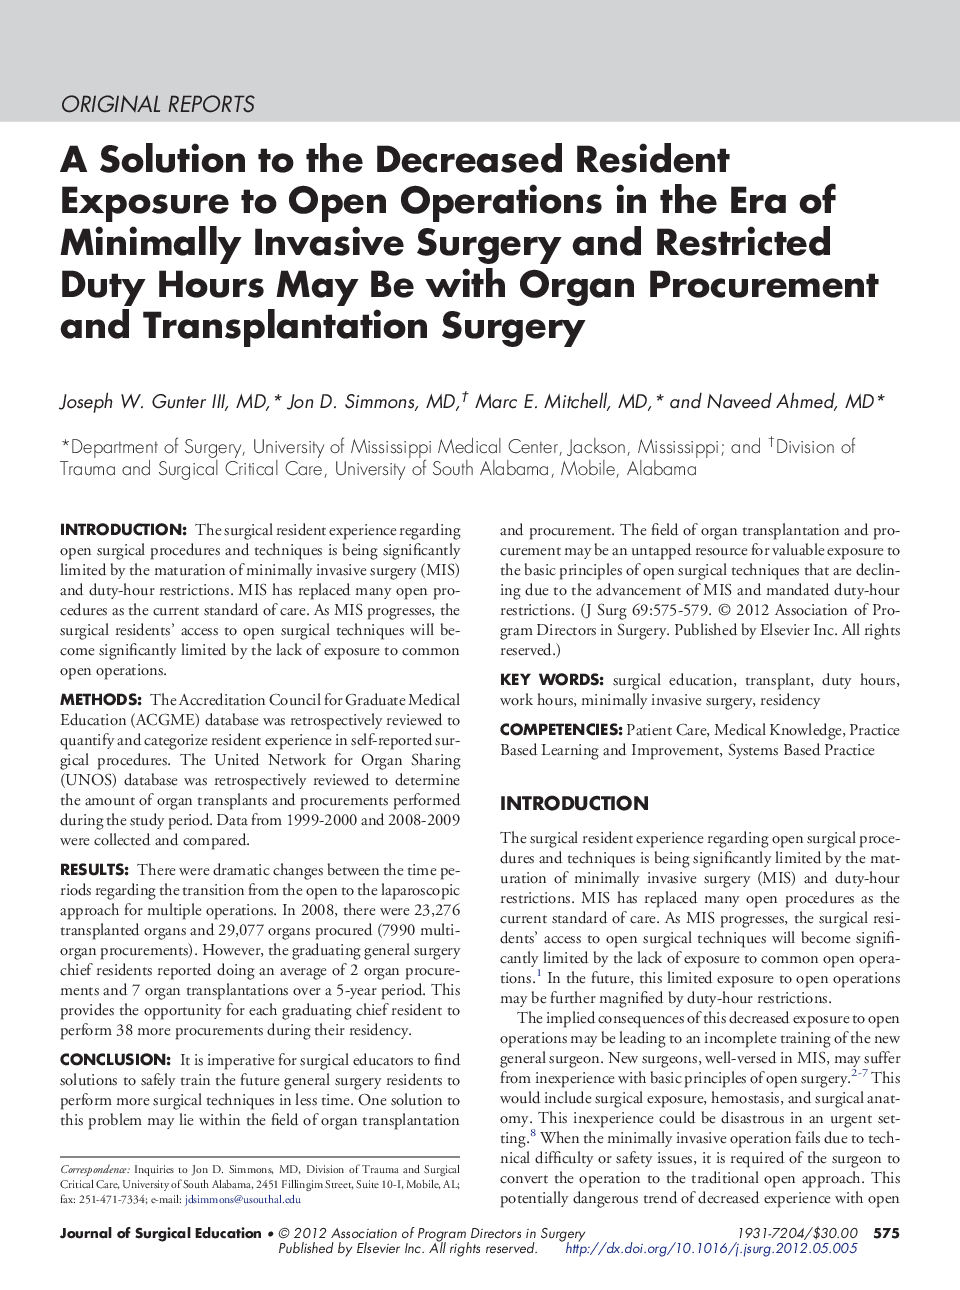 A Solution to the Decreased Resident Exposure to Open Operations in the Era of Minimally Invasive Surgery and Restricted Duty Hours May Be with Organ Procurement and Transplantation Surgery